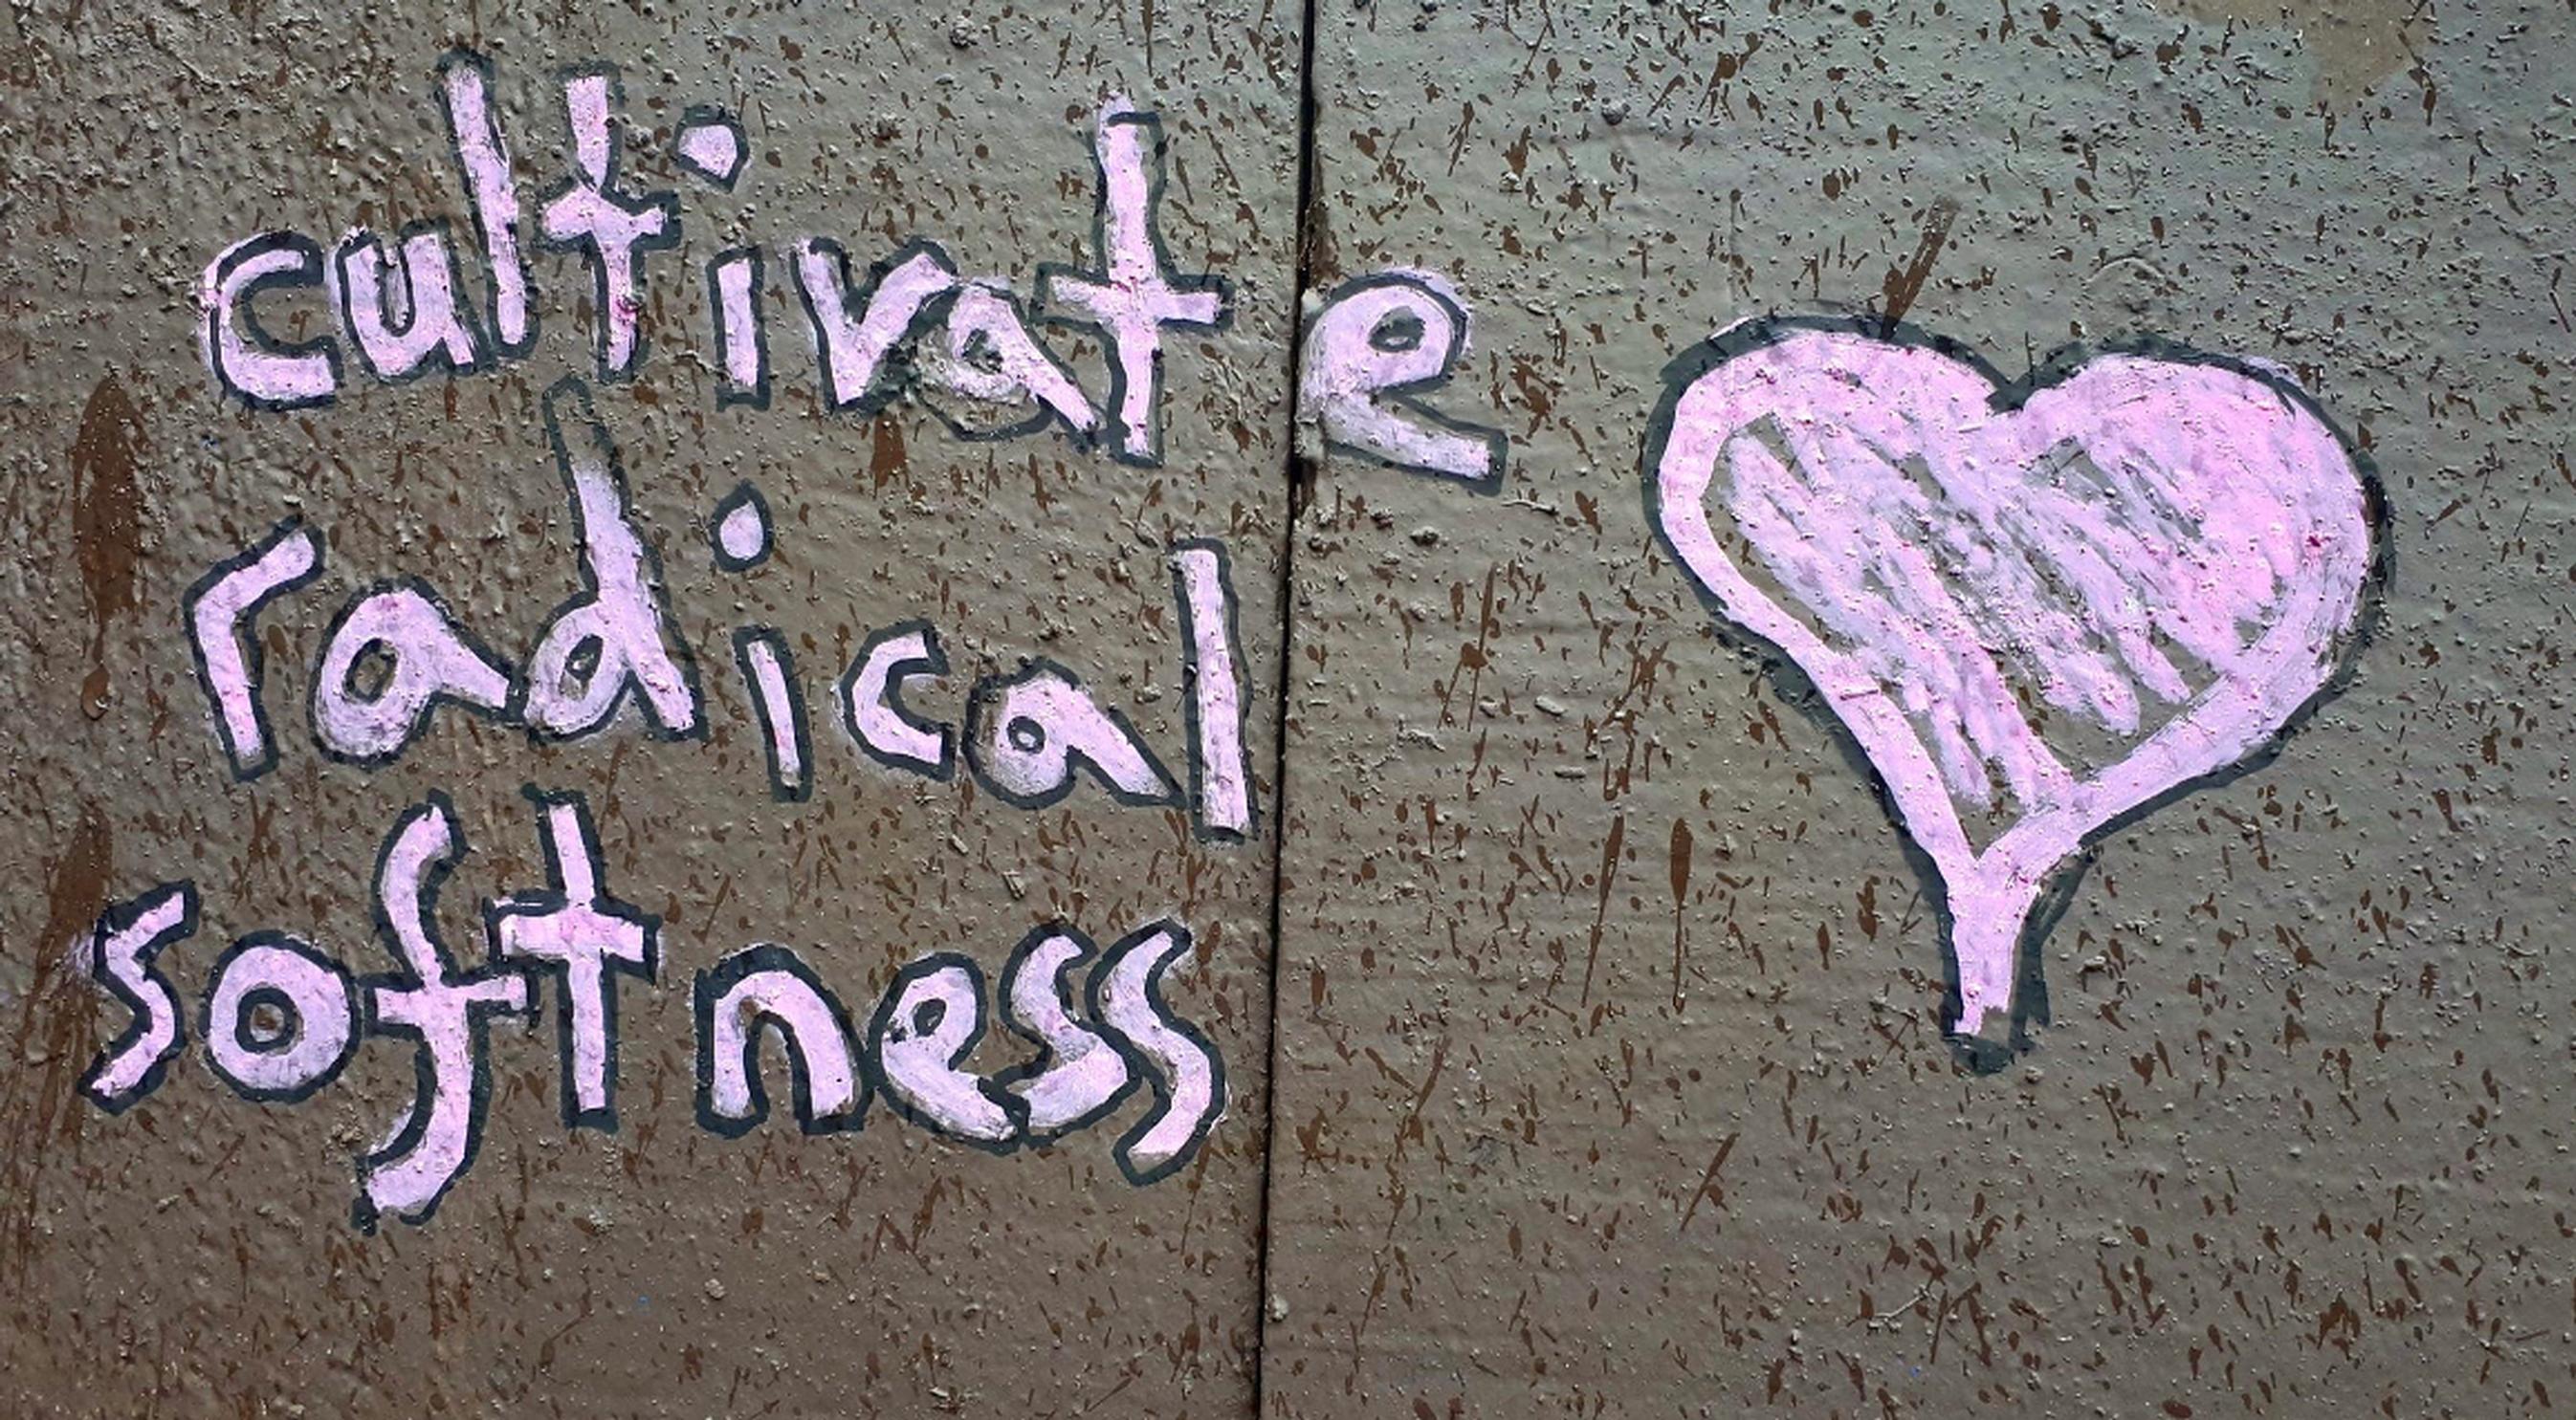 Becki Cox, Glasgow (Pink week winner said): “The graffiti in the picture I submitted says ‘cultivate radical softness’. As people walking, we are required to both look down at our feet but also up and out at the world around us. Walking connects us and enables those little moments of everyday humanity!”